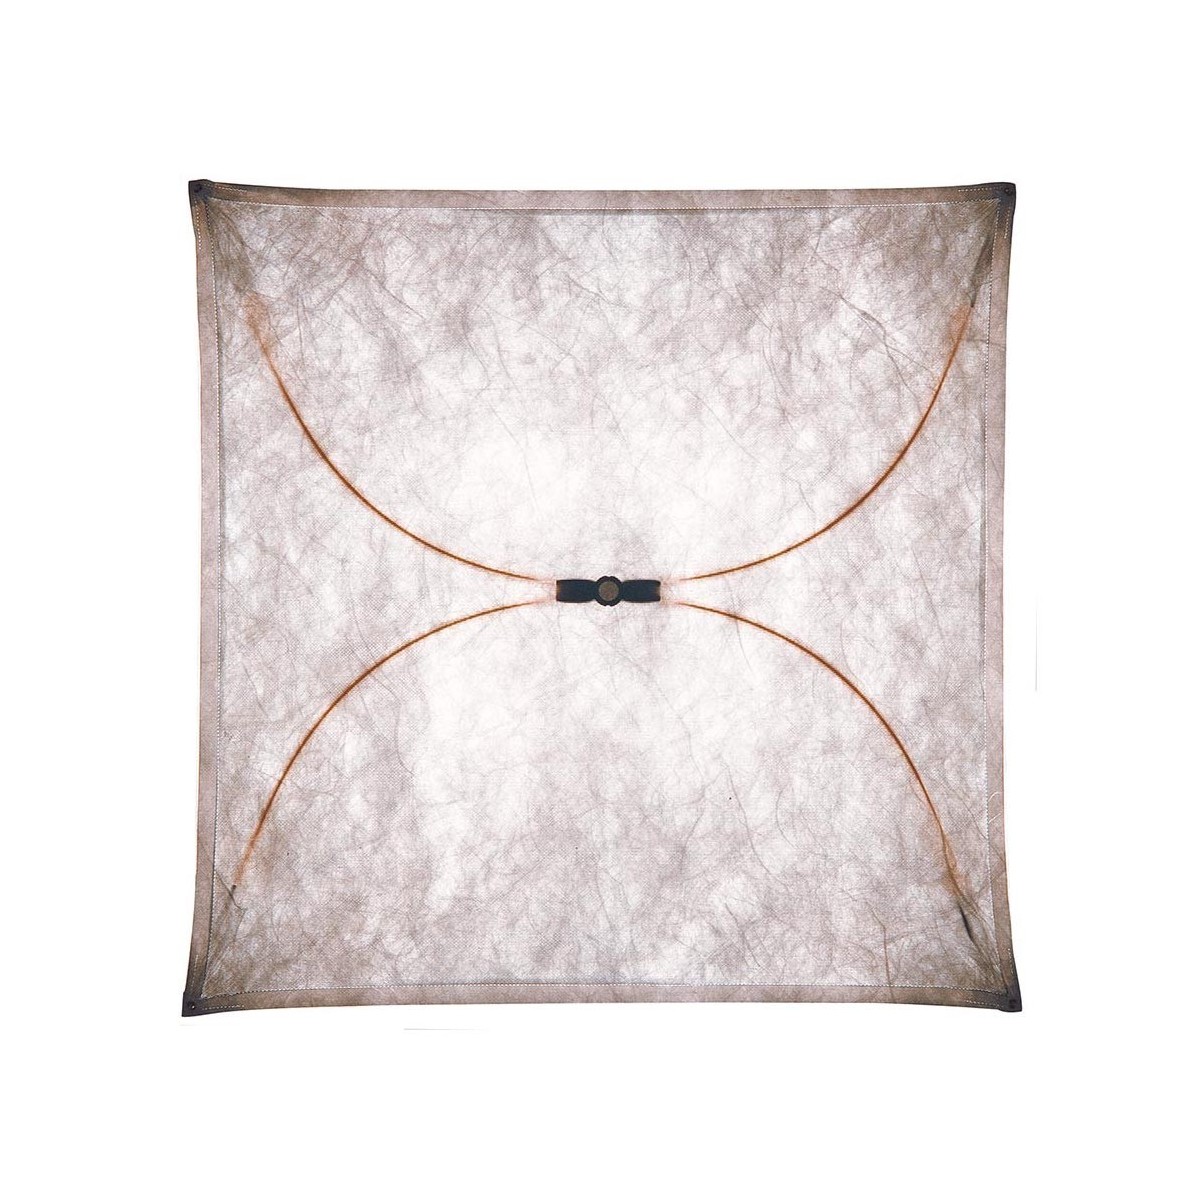 Ariette wall / ceiling lamp